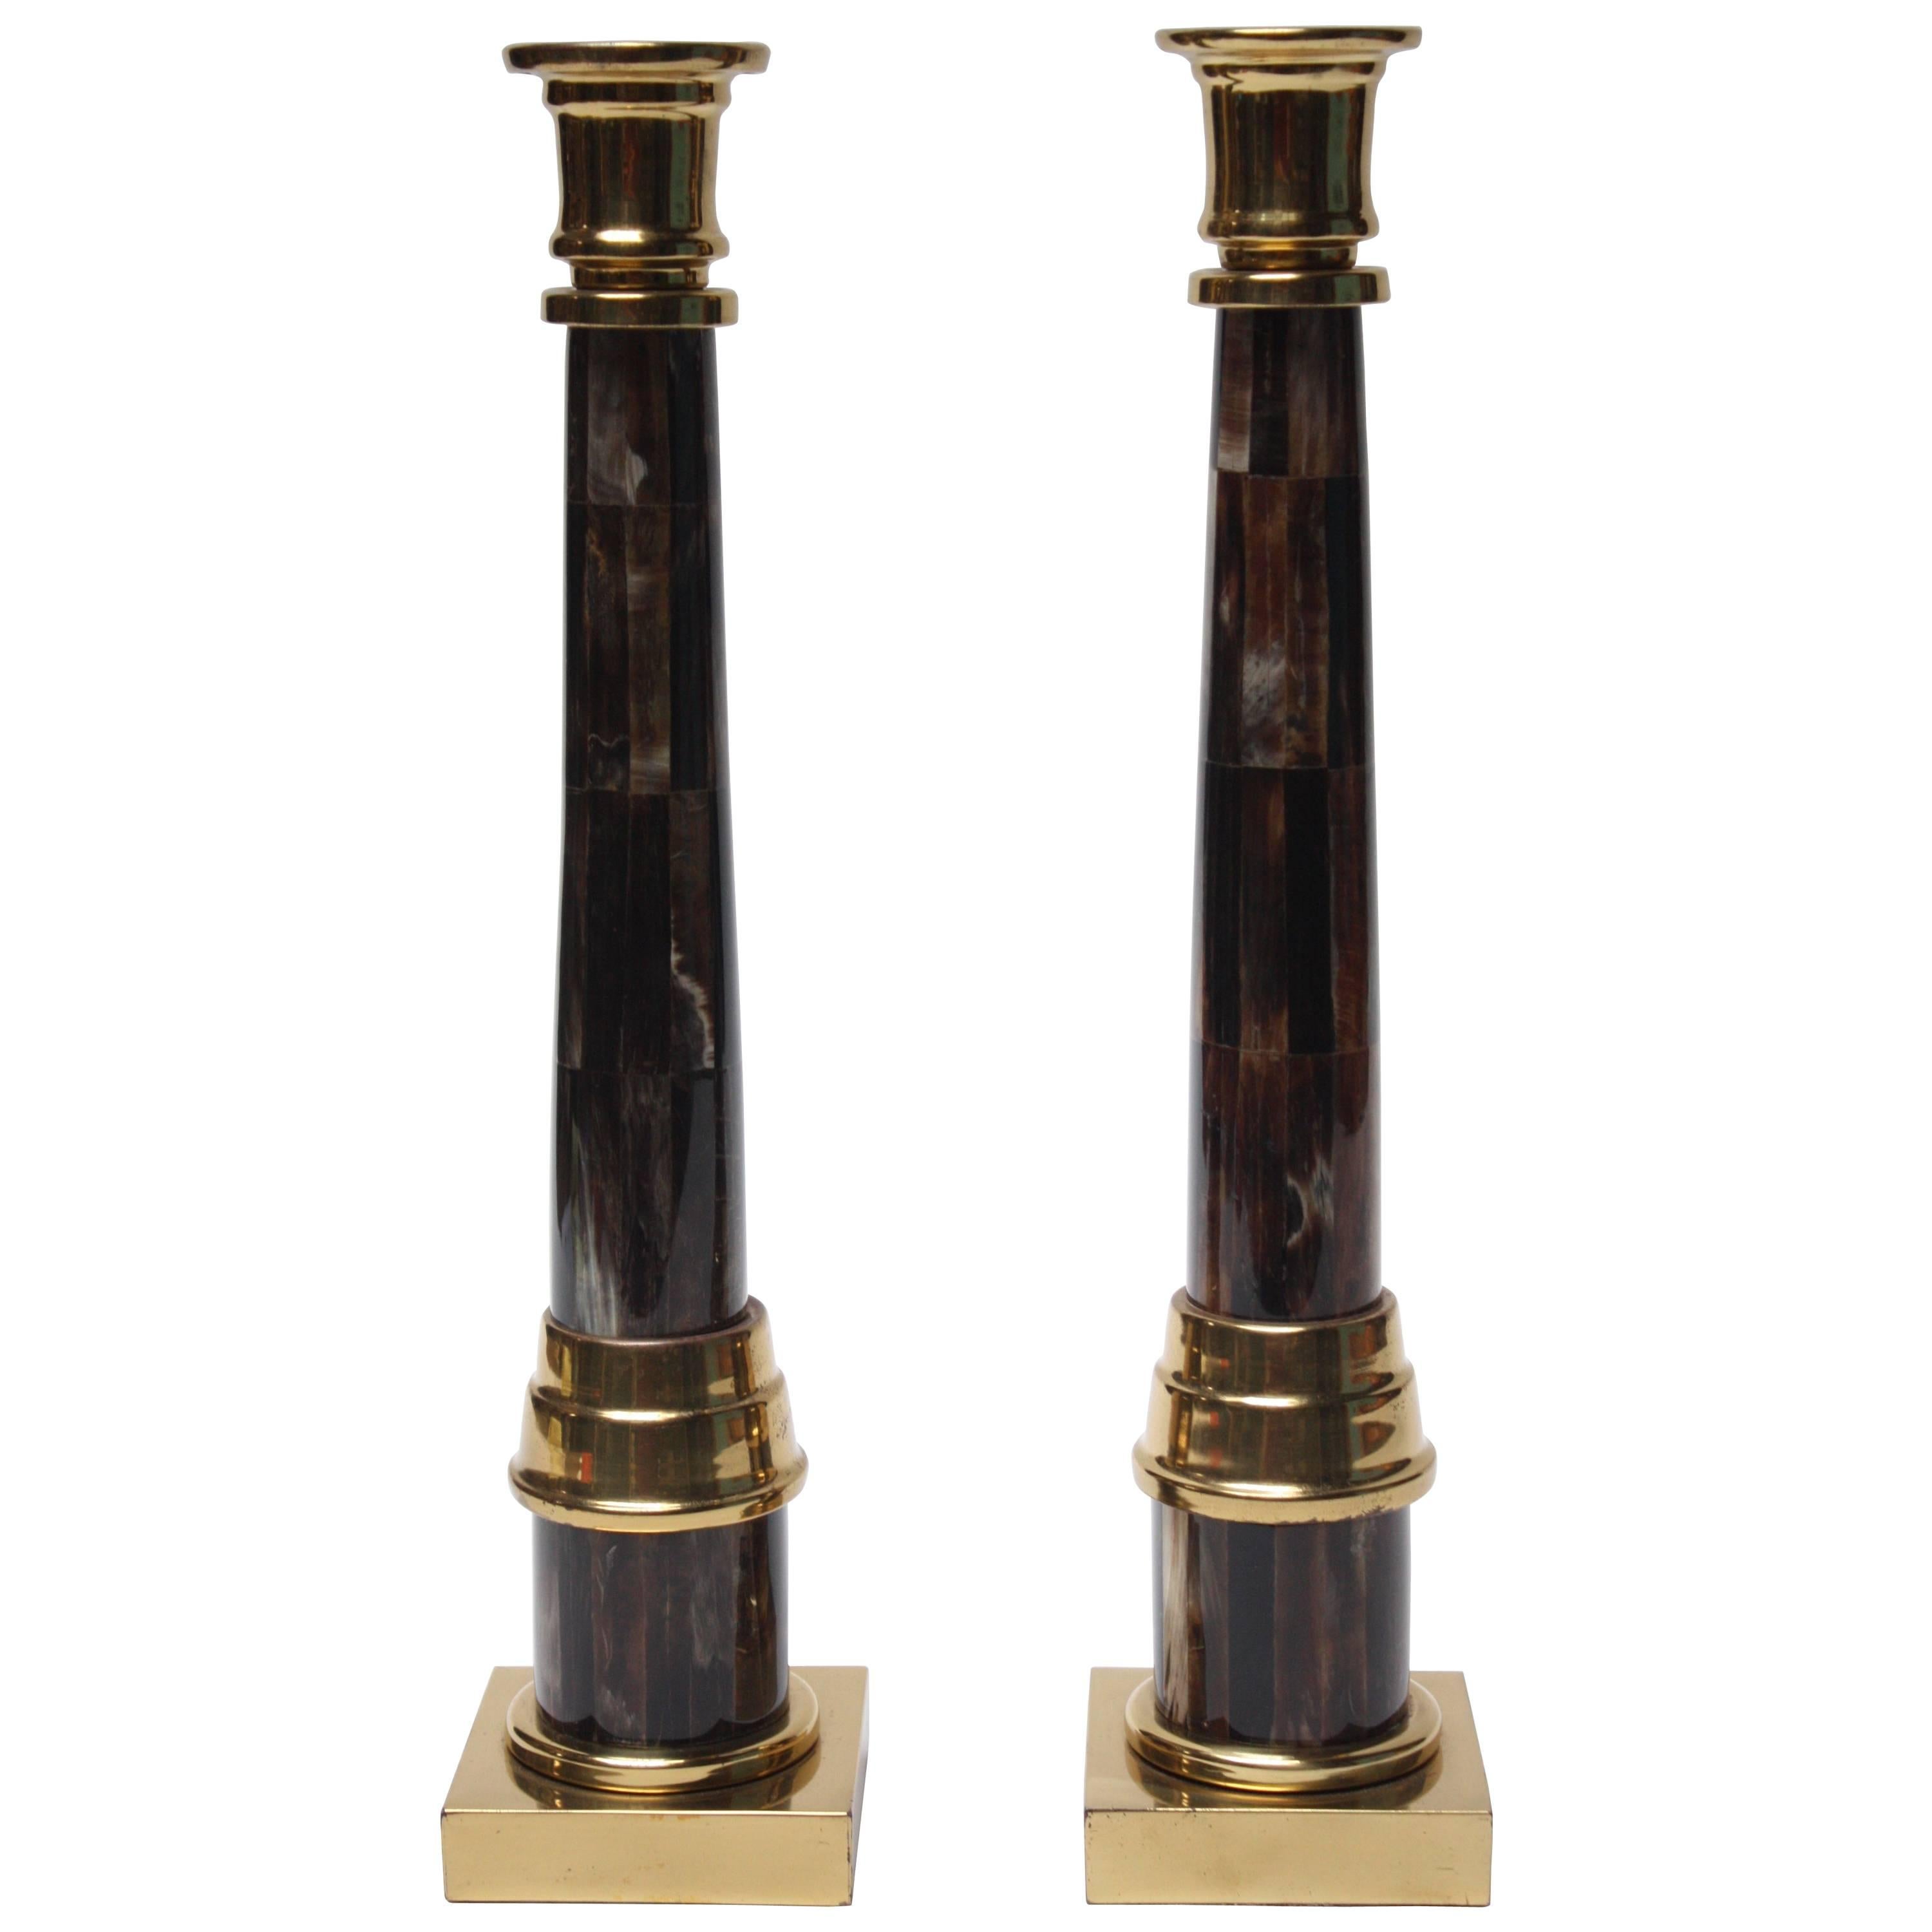 Pair of Enrique Garcel Lacquer, Resin and Brass Candlesticks